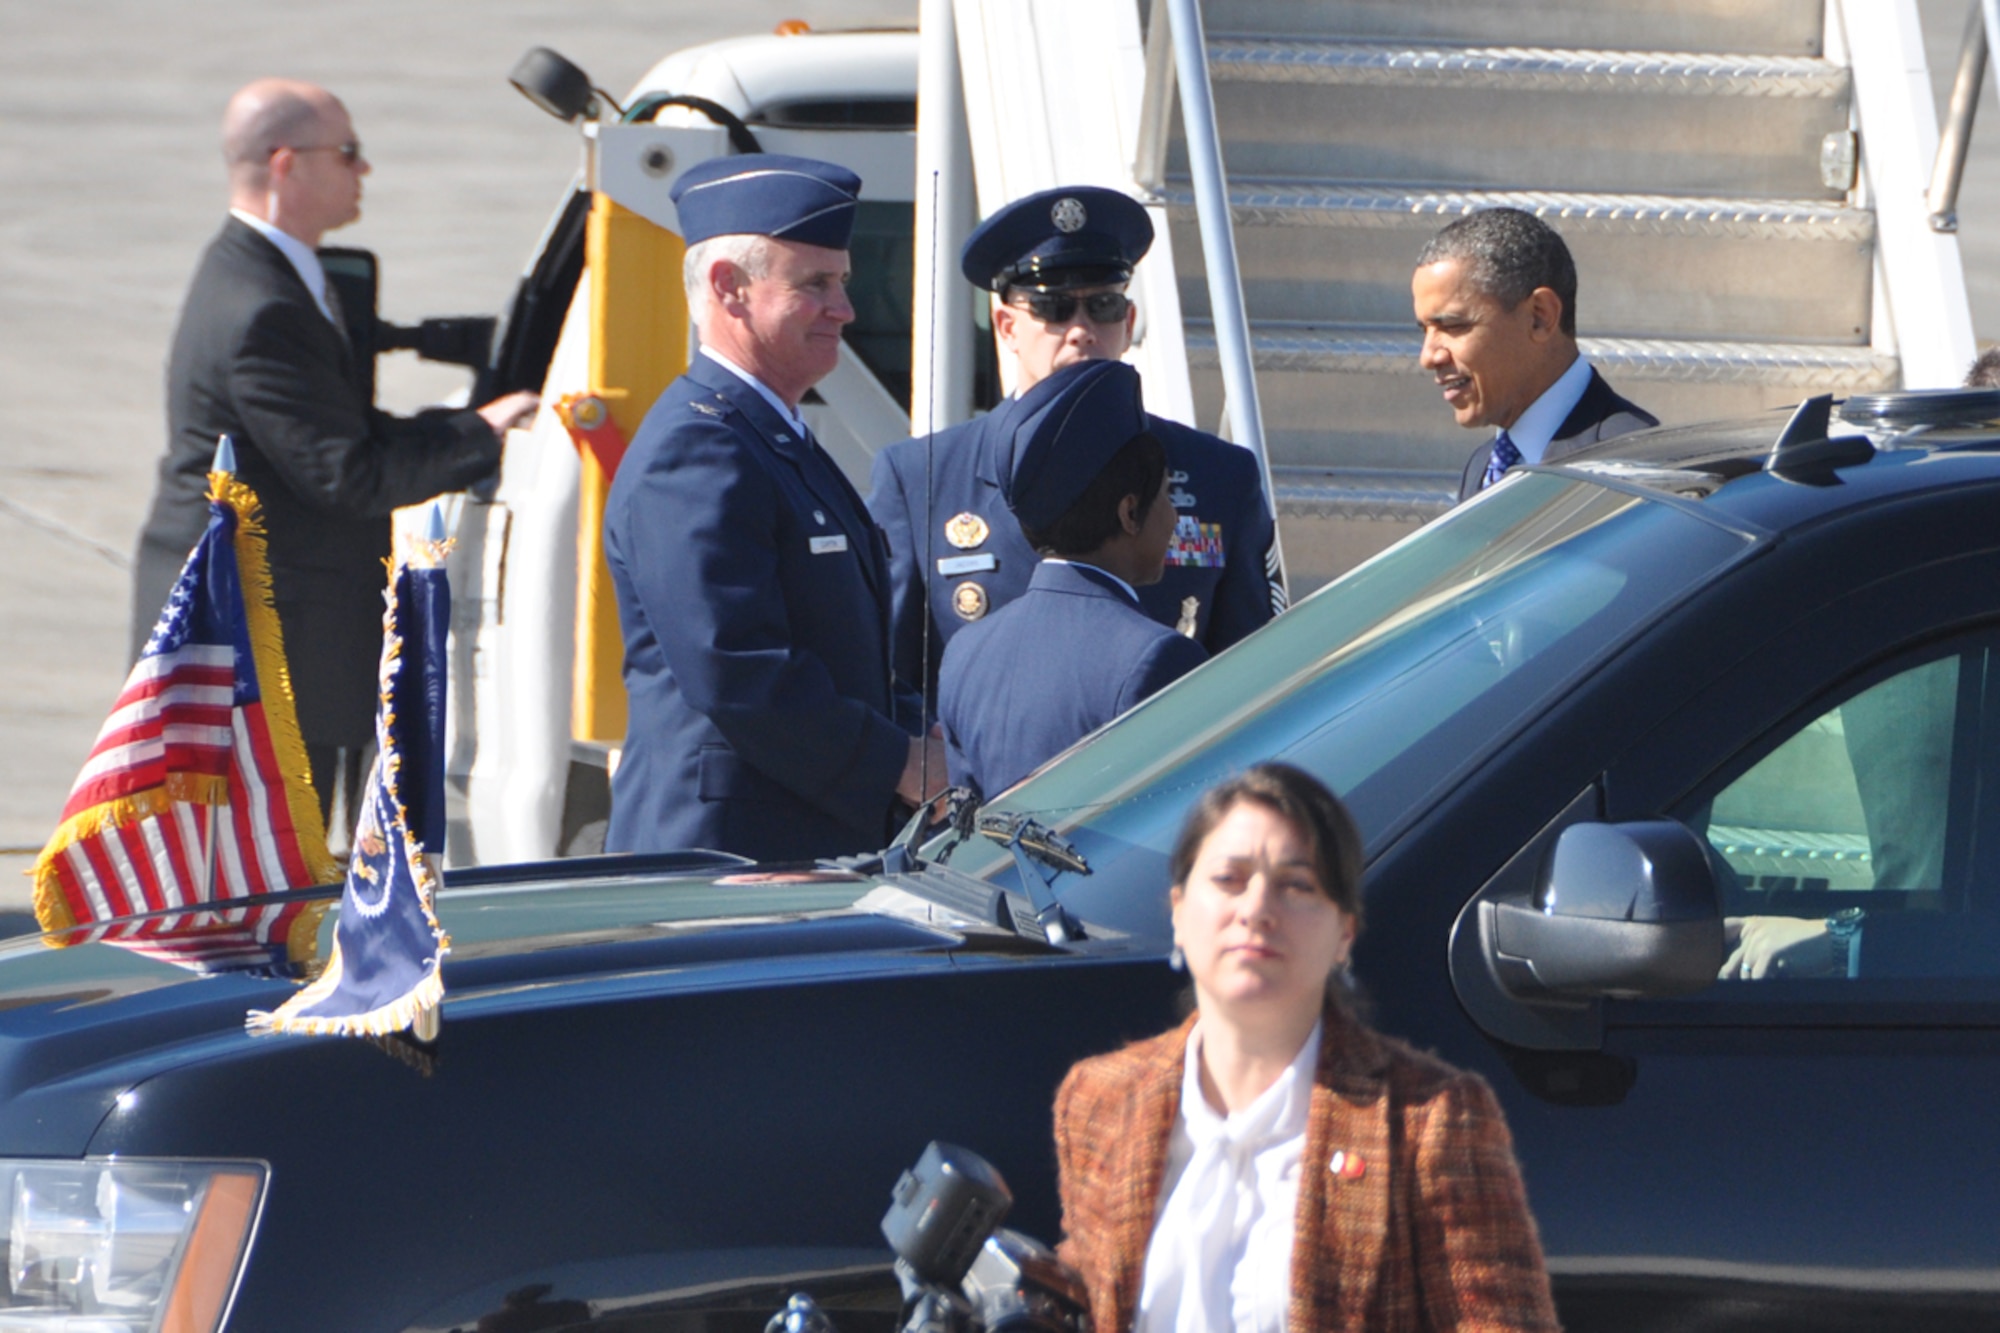 Col. Steven R. Clayton, 94th Operations Group commander and Senior Airman Tumyra D. Byron, knowledge management specialist, greet President Barack Obama during his visit to Dobbins Air Reserve Base, Feb. 14. The president was en-route to the City of Decatur Recreation Center to discuss proposals outlined in his recent state of the union address. Bryon received a President’s Coin from Obama during the visit. (U.S.Air Force photo/James Branch)